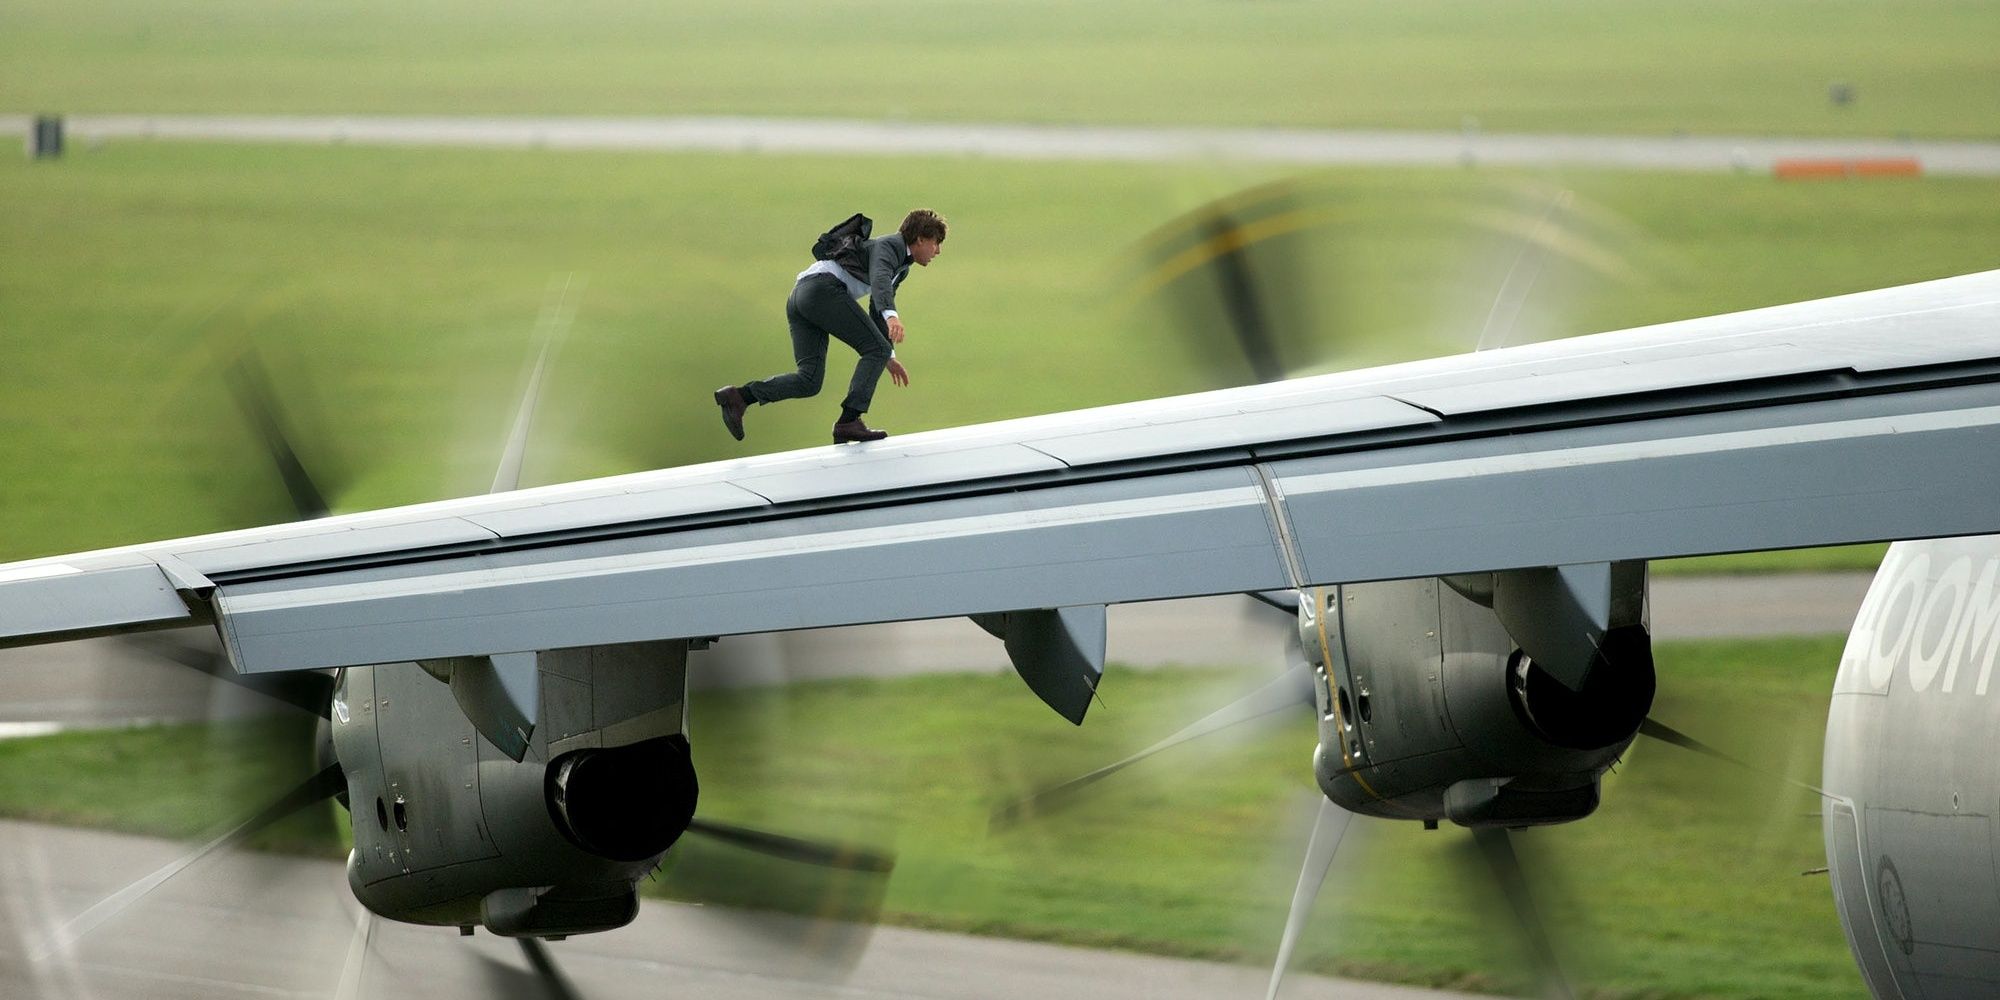 Ethan Hunt tries to get into a plane transporting radioactive VX nerve gas in Rogue Nation